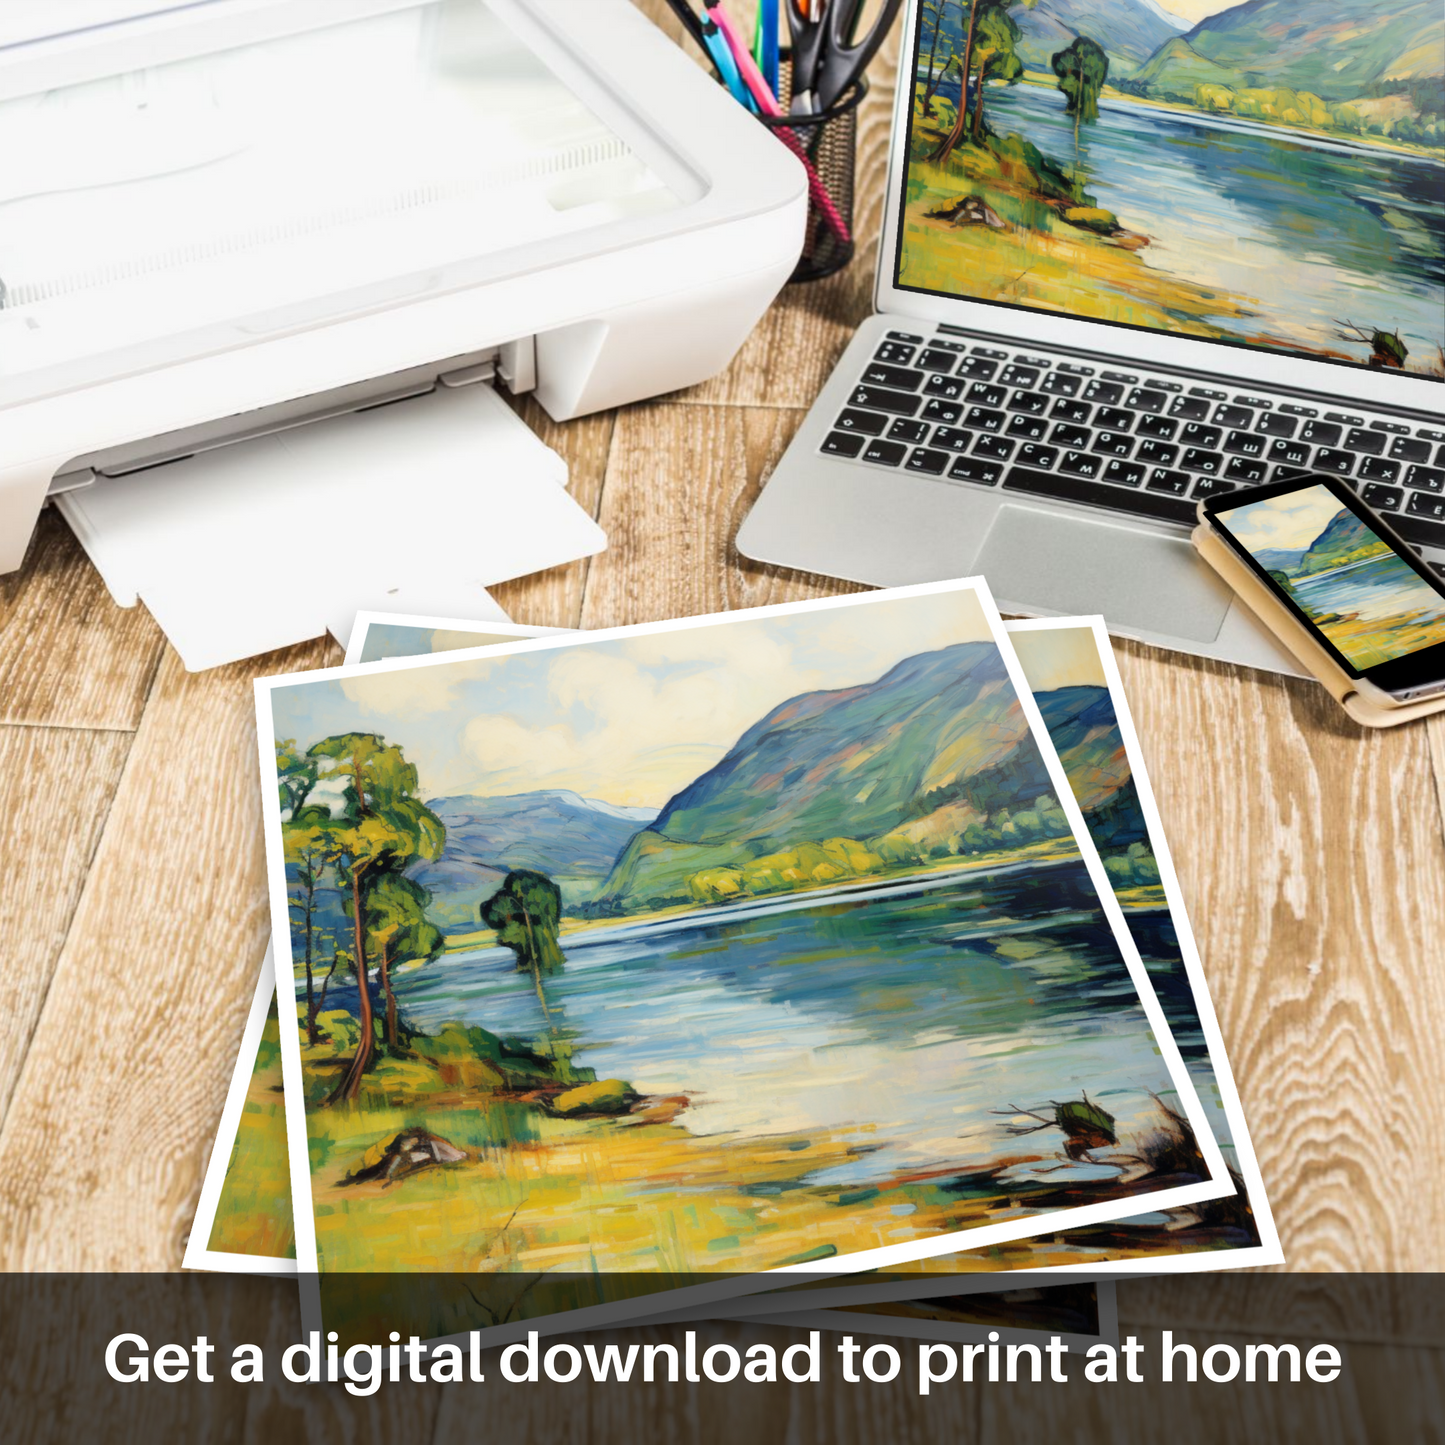 Downloadable and printable picture of Loch Voil in summer